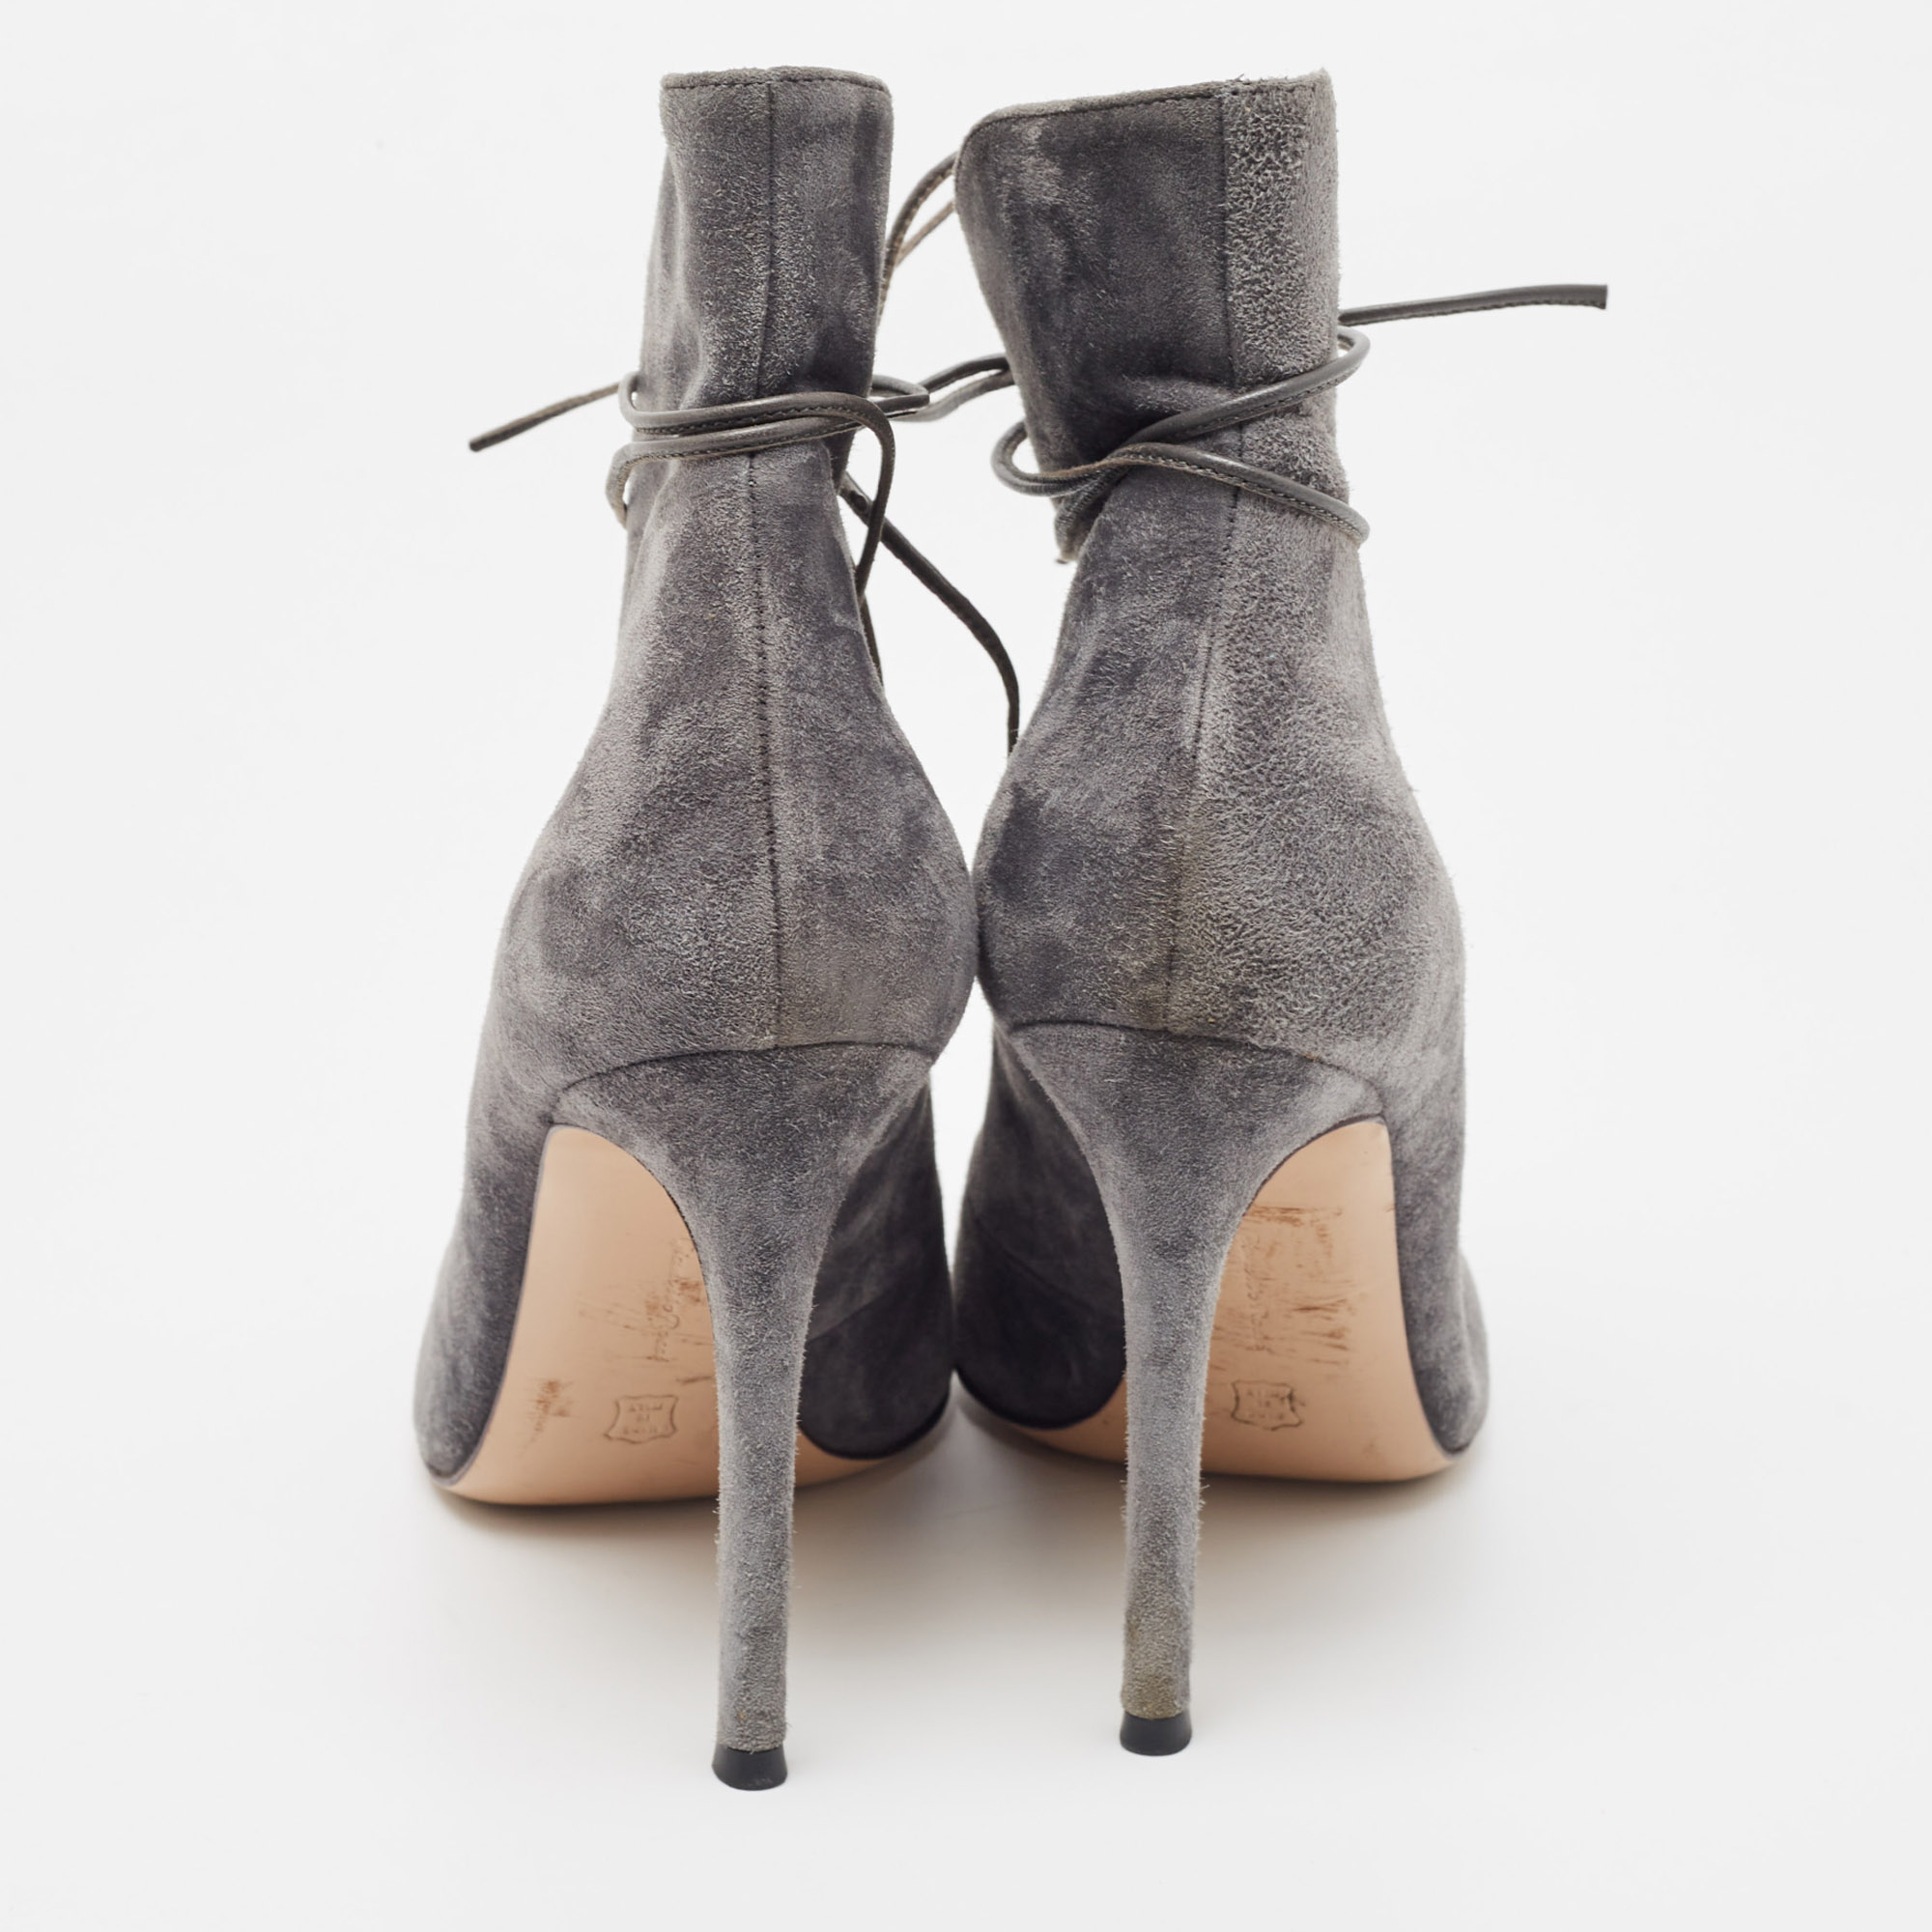 Gianvito Rossi Grey Suede Jane Ankle Booties Size 38.5